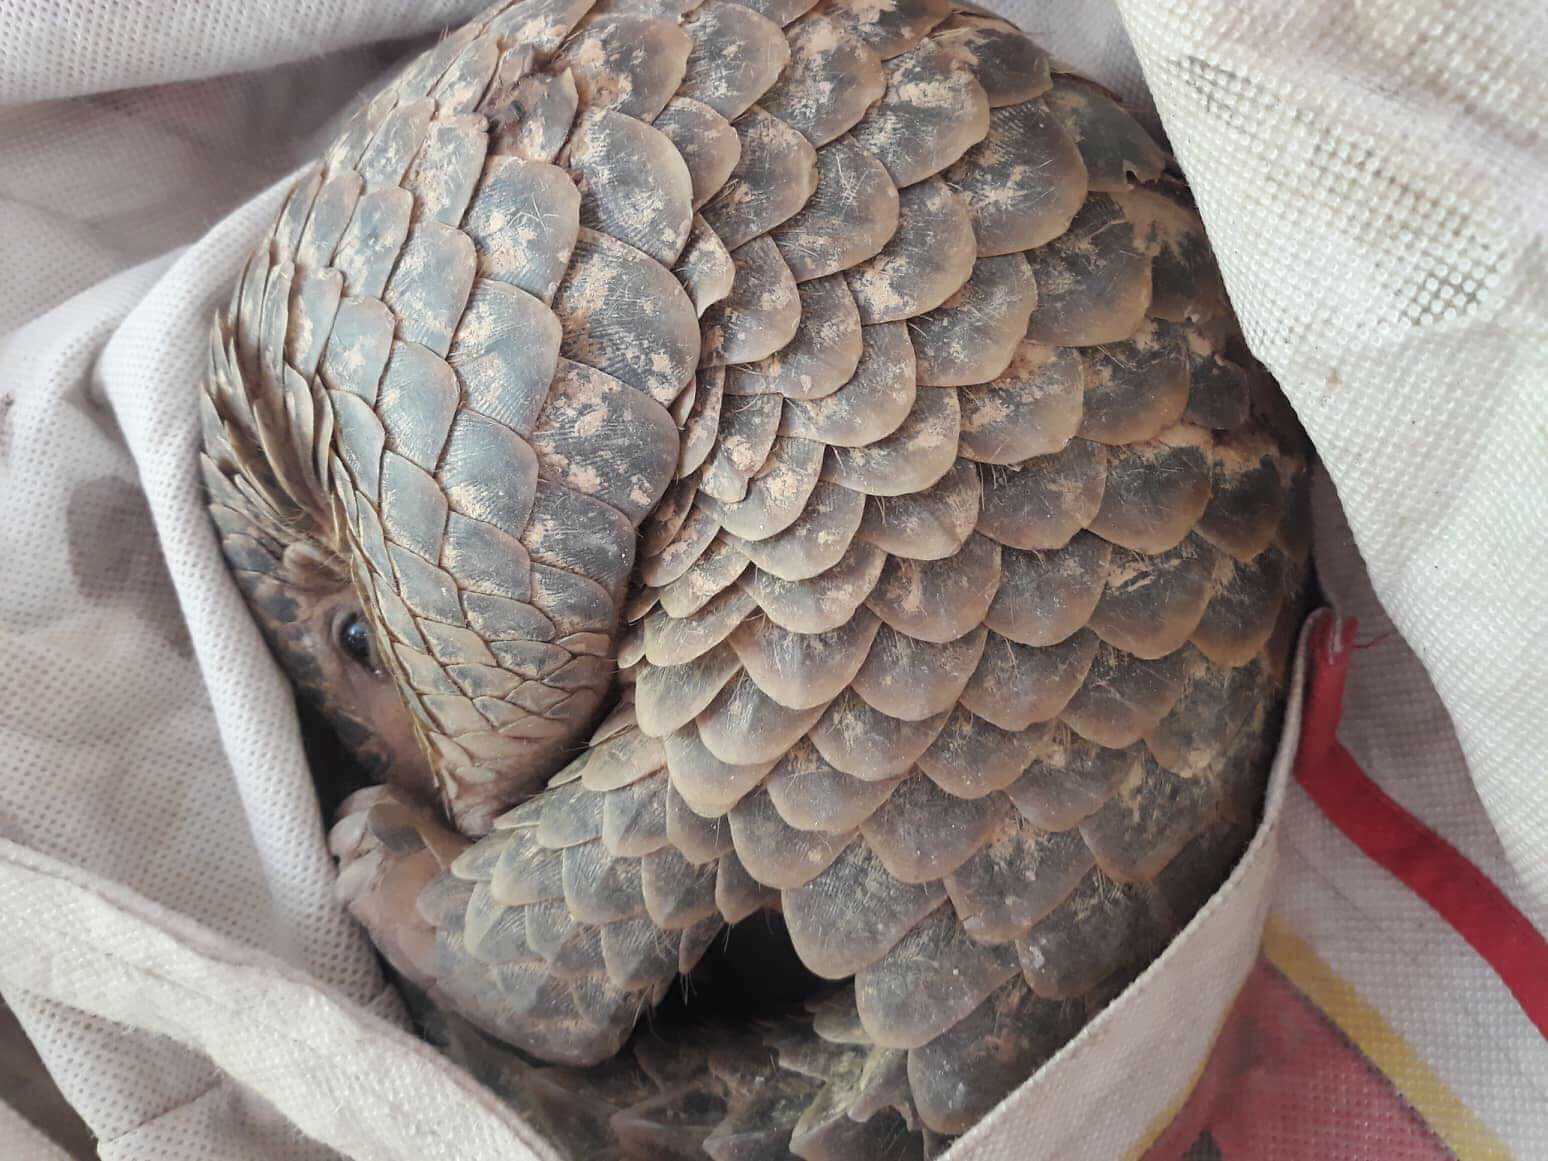 Nigeria: Global Investigation – Pangolins: Trafficked to Extinction